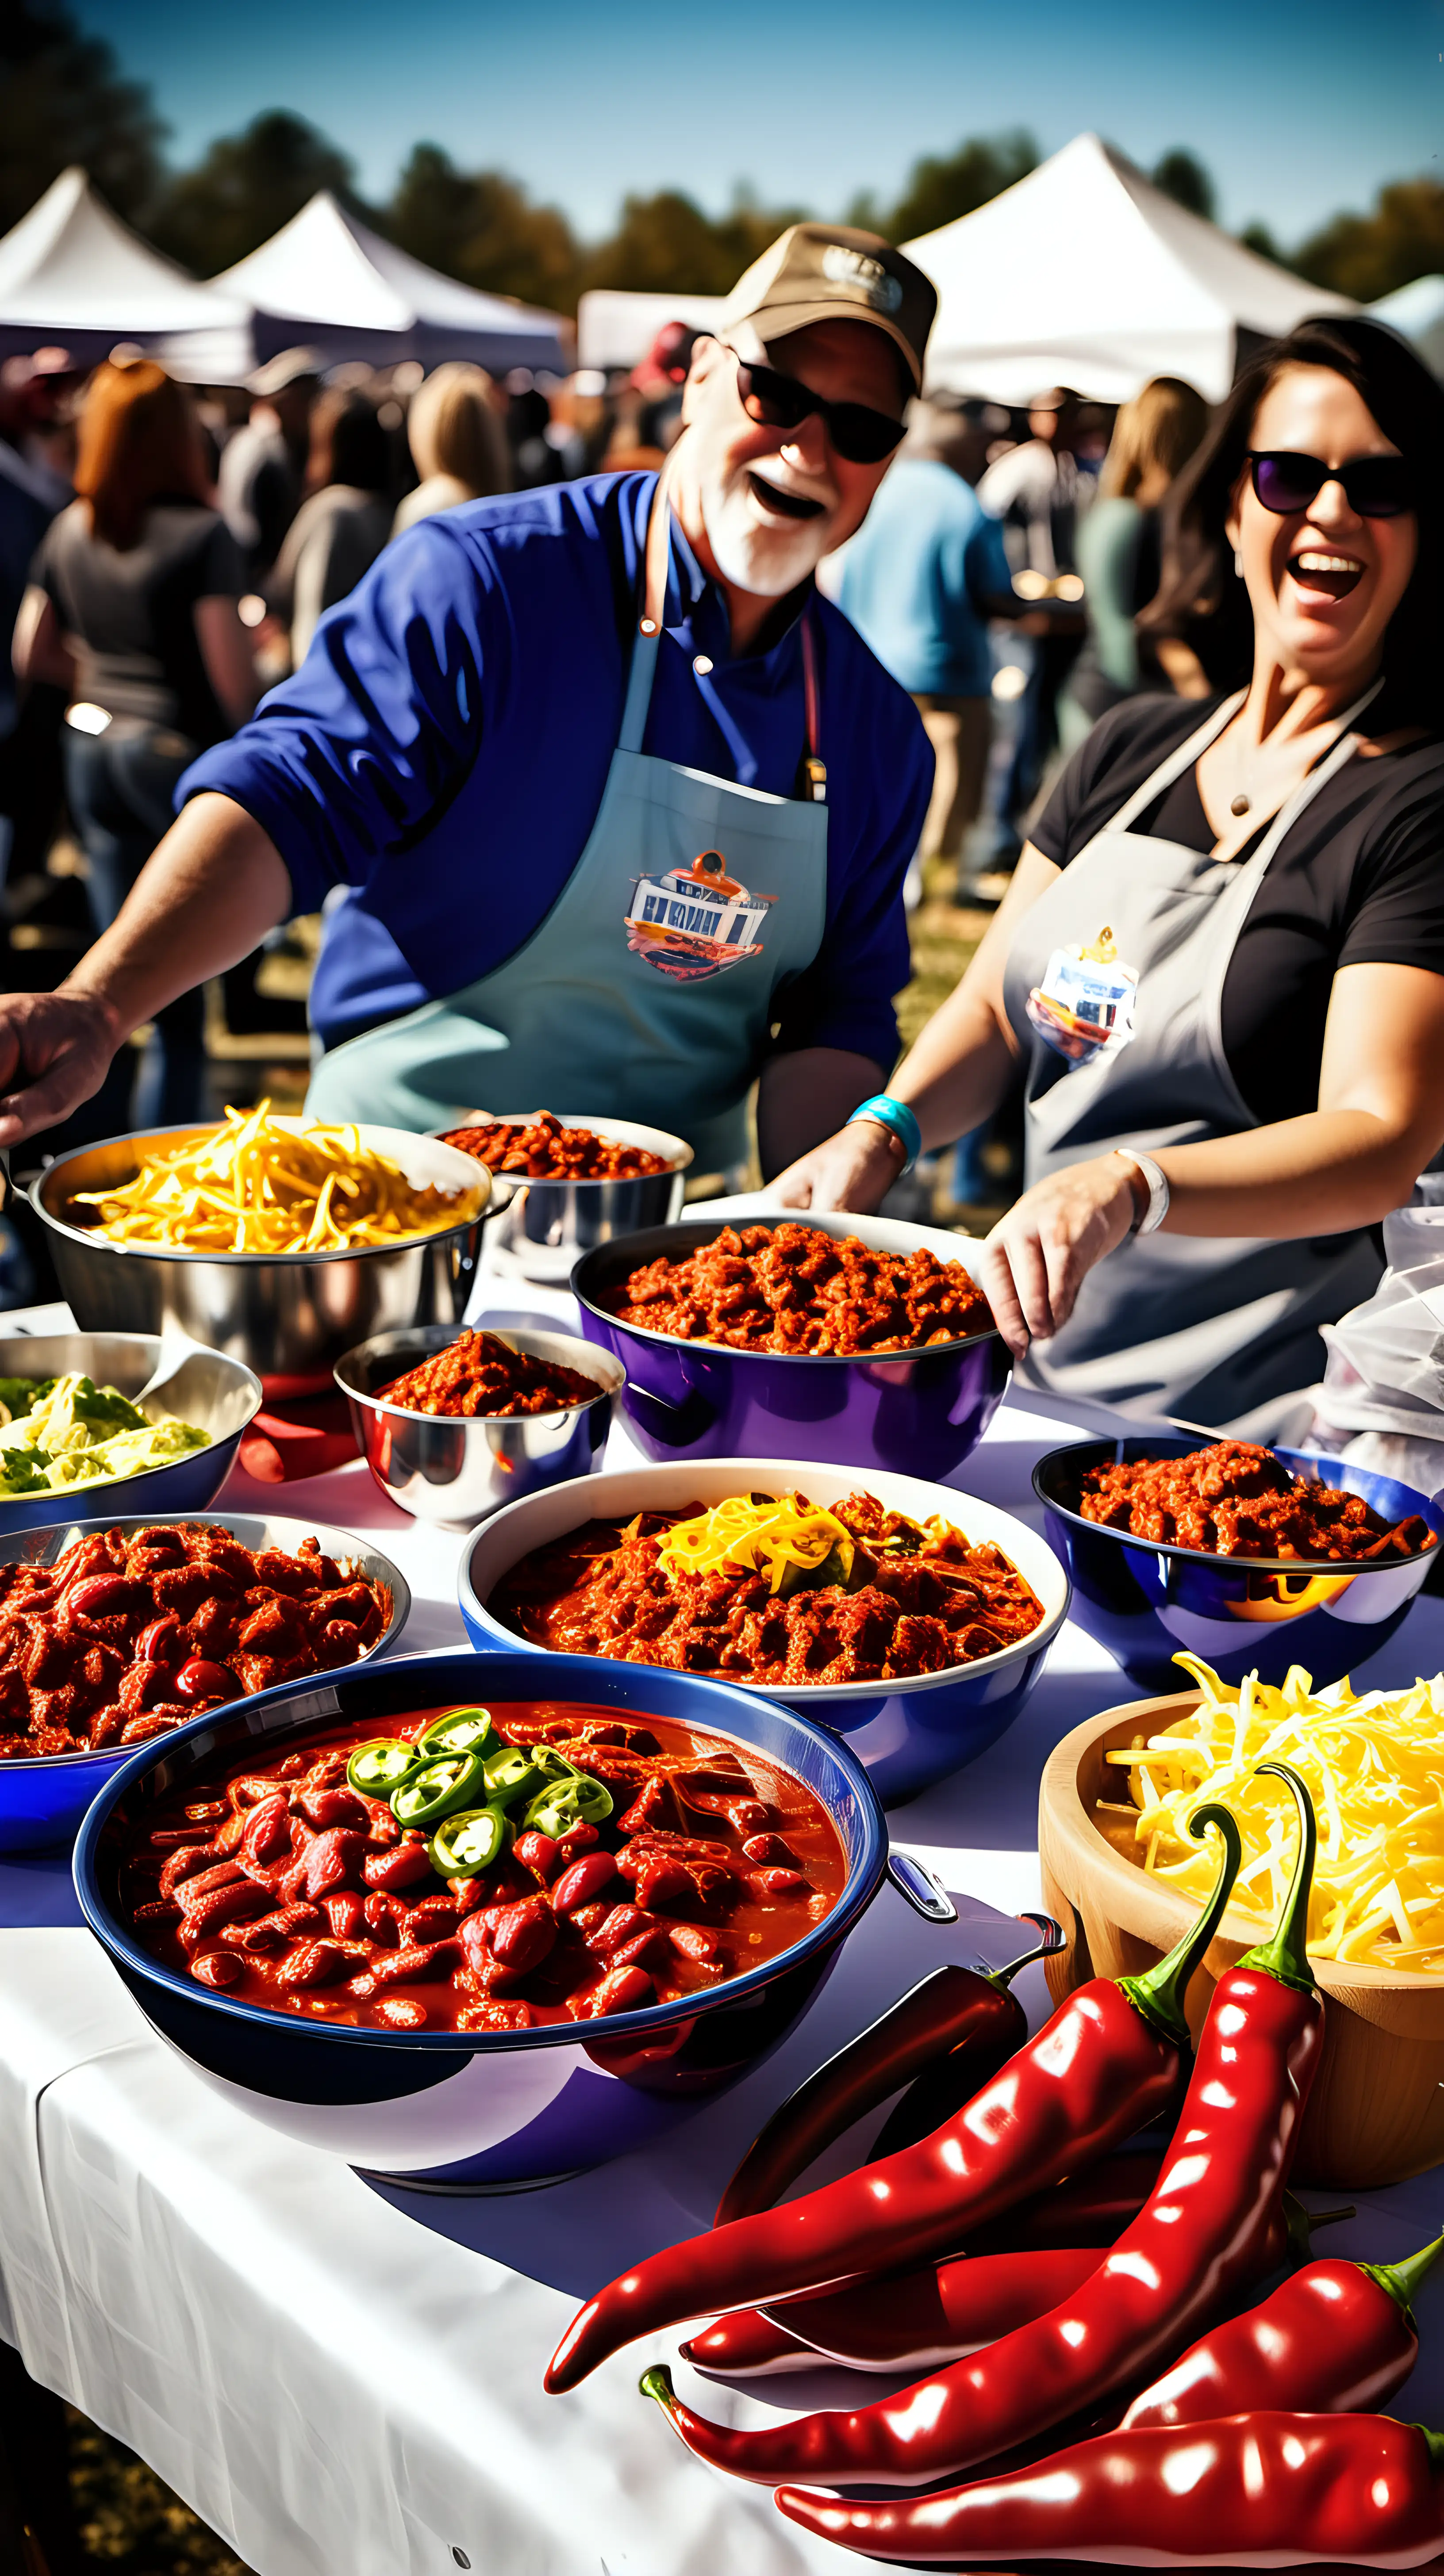 /imagine prompt: A photographic style image capturing the vibrant spirit of a chili cookoff contest outdoors, competitors focused on perfecting their recipes, cheerful crowds tasting, and a display of various trophies gleaming in the background under a bright afternoon sun. Created Using: outdoor festival, recipe perfection, cheerful crowds, tasting event, trophy display, bright afternoon, vibrant spirit, culinary celebration, hd quality, vivid style --ar 16:9 --v 6.0